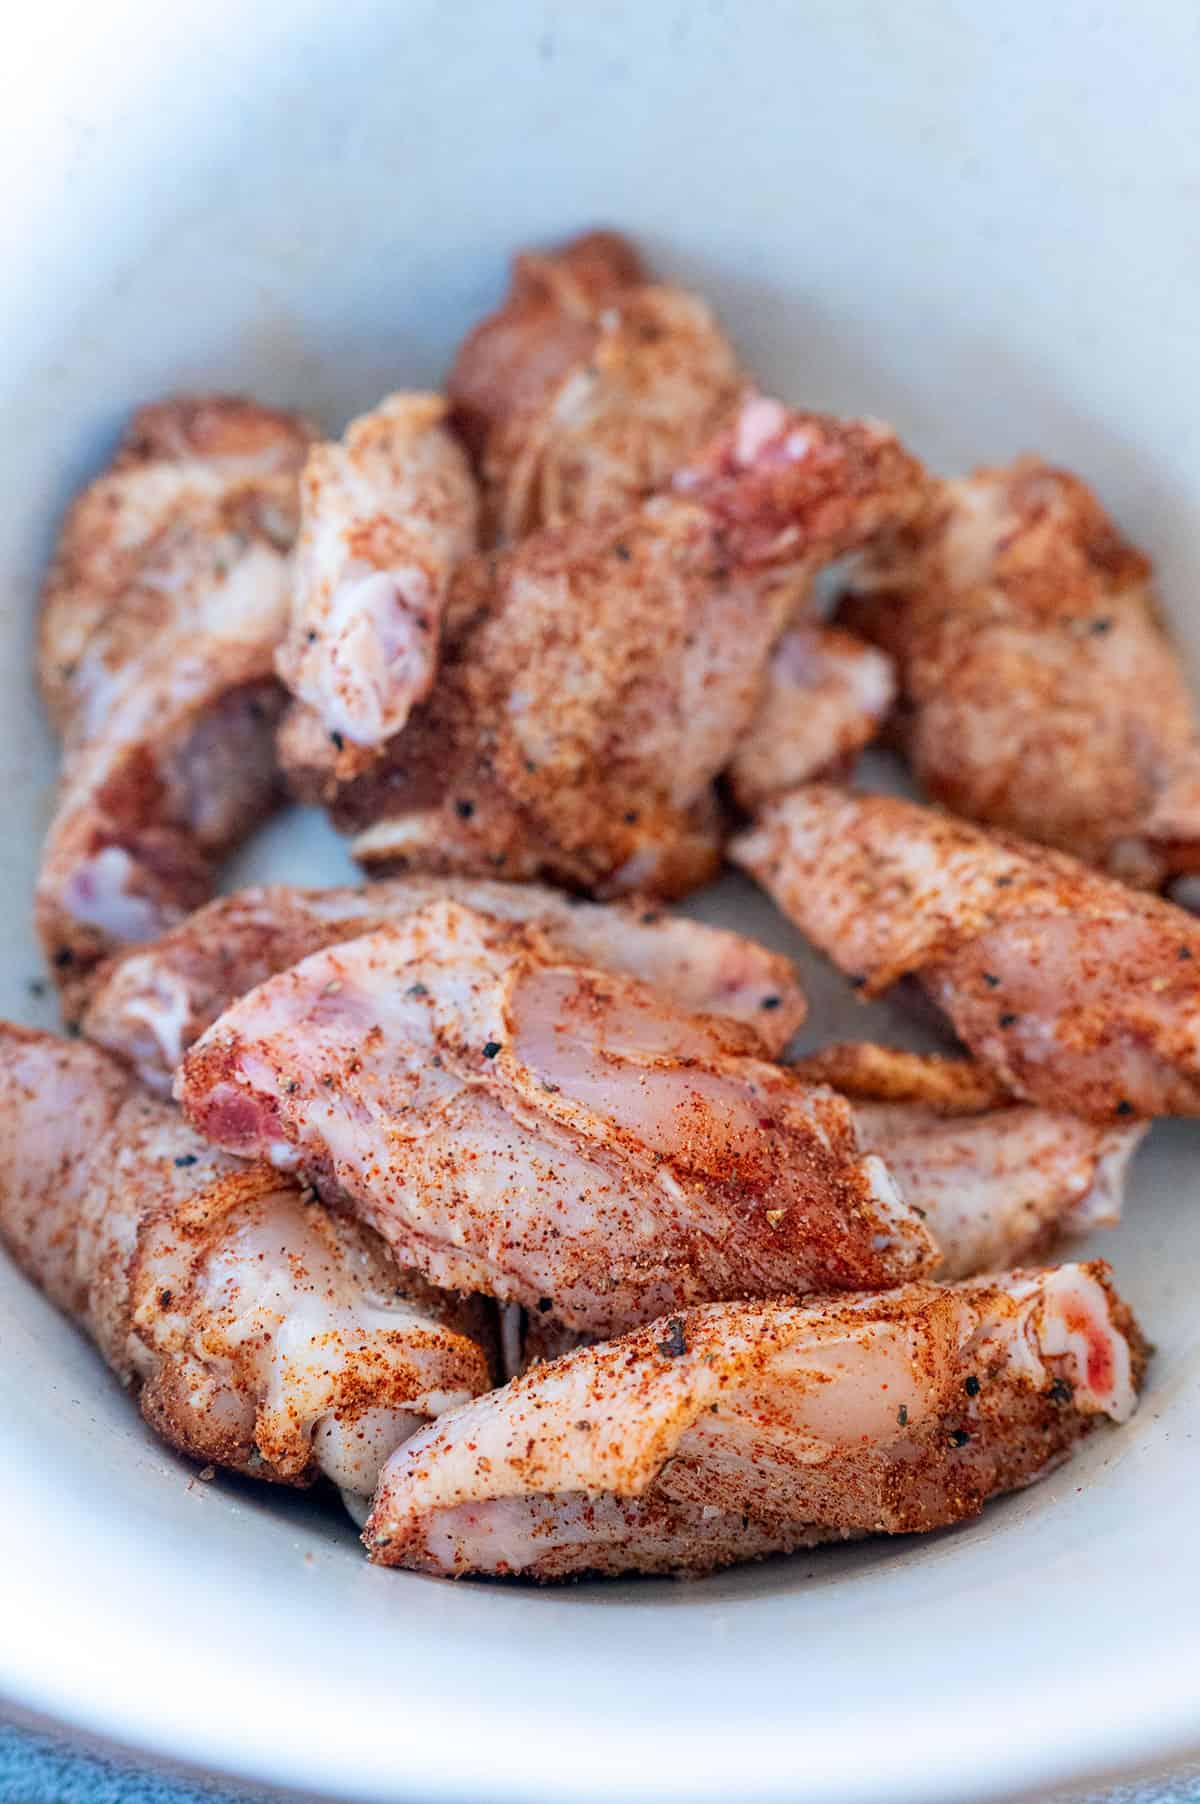 Raw chicken wings rubbed with chicken wing dry rub in white bowl.